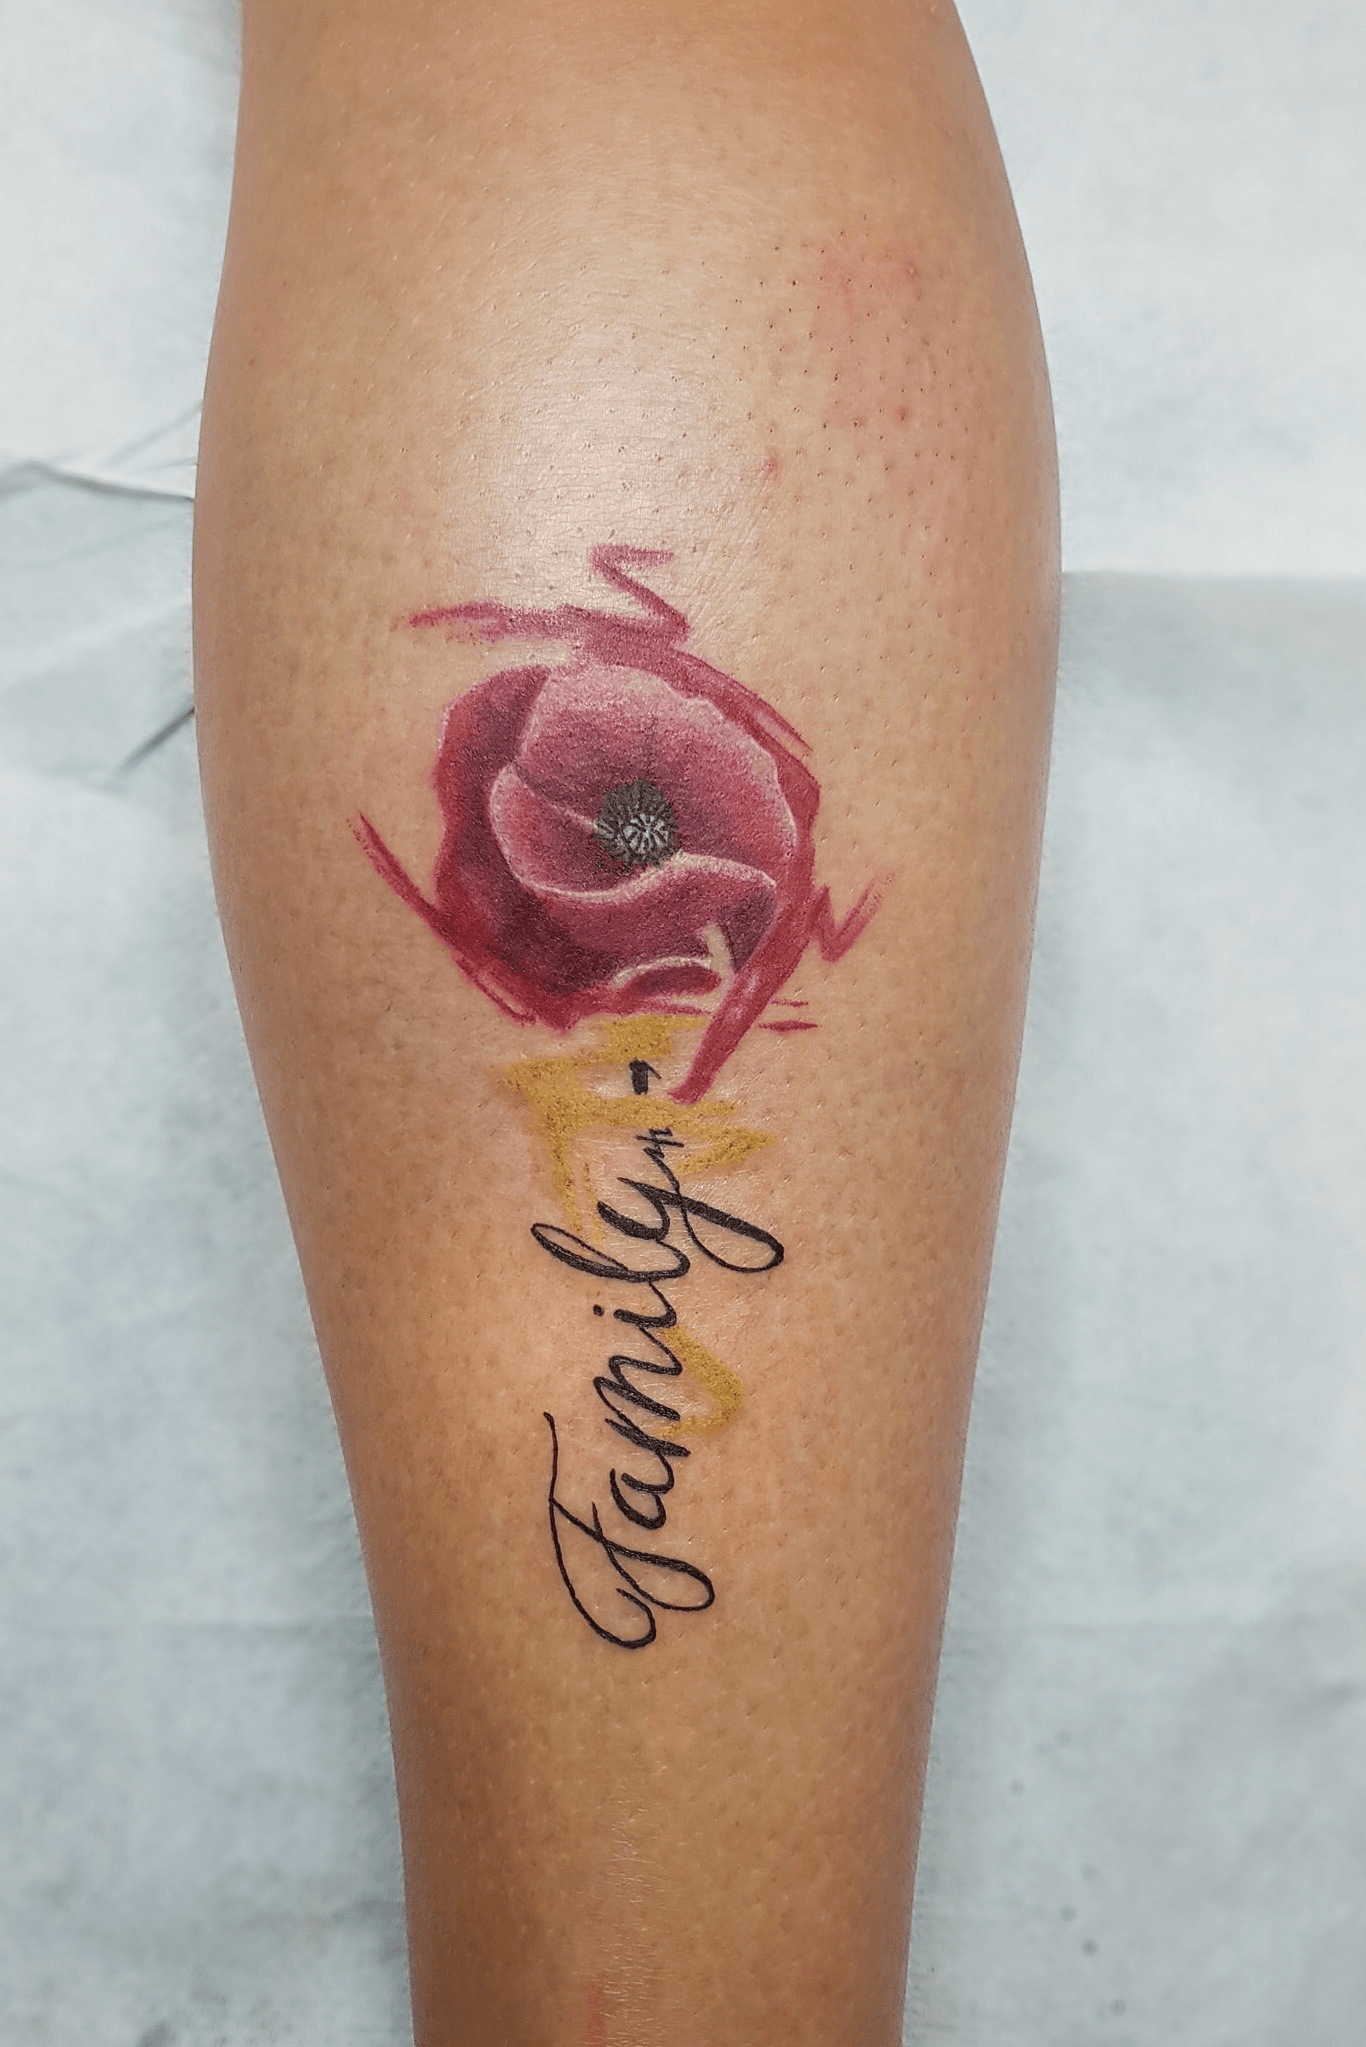 16 Trending IGY6 Tattoo Ideas For This Year